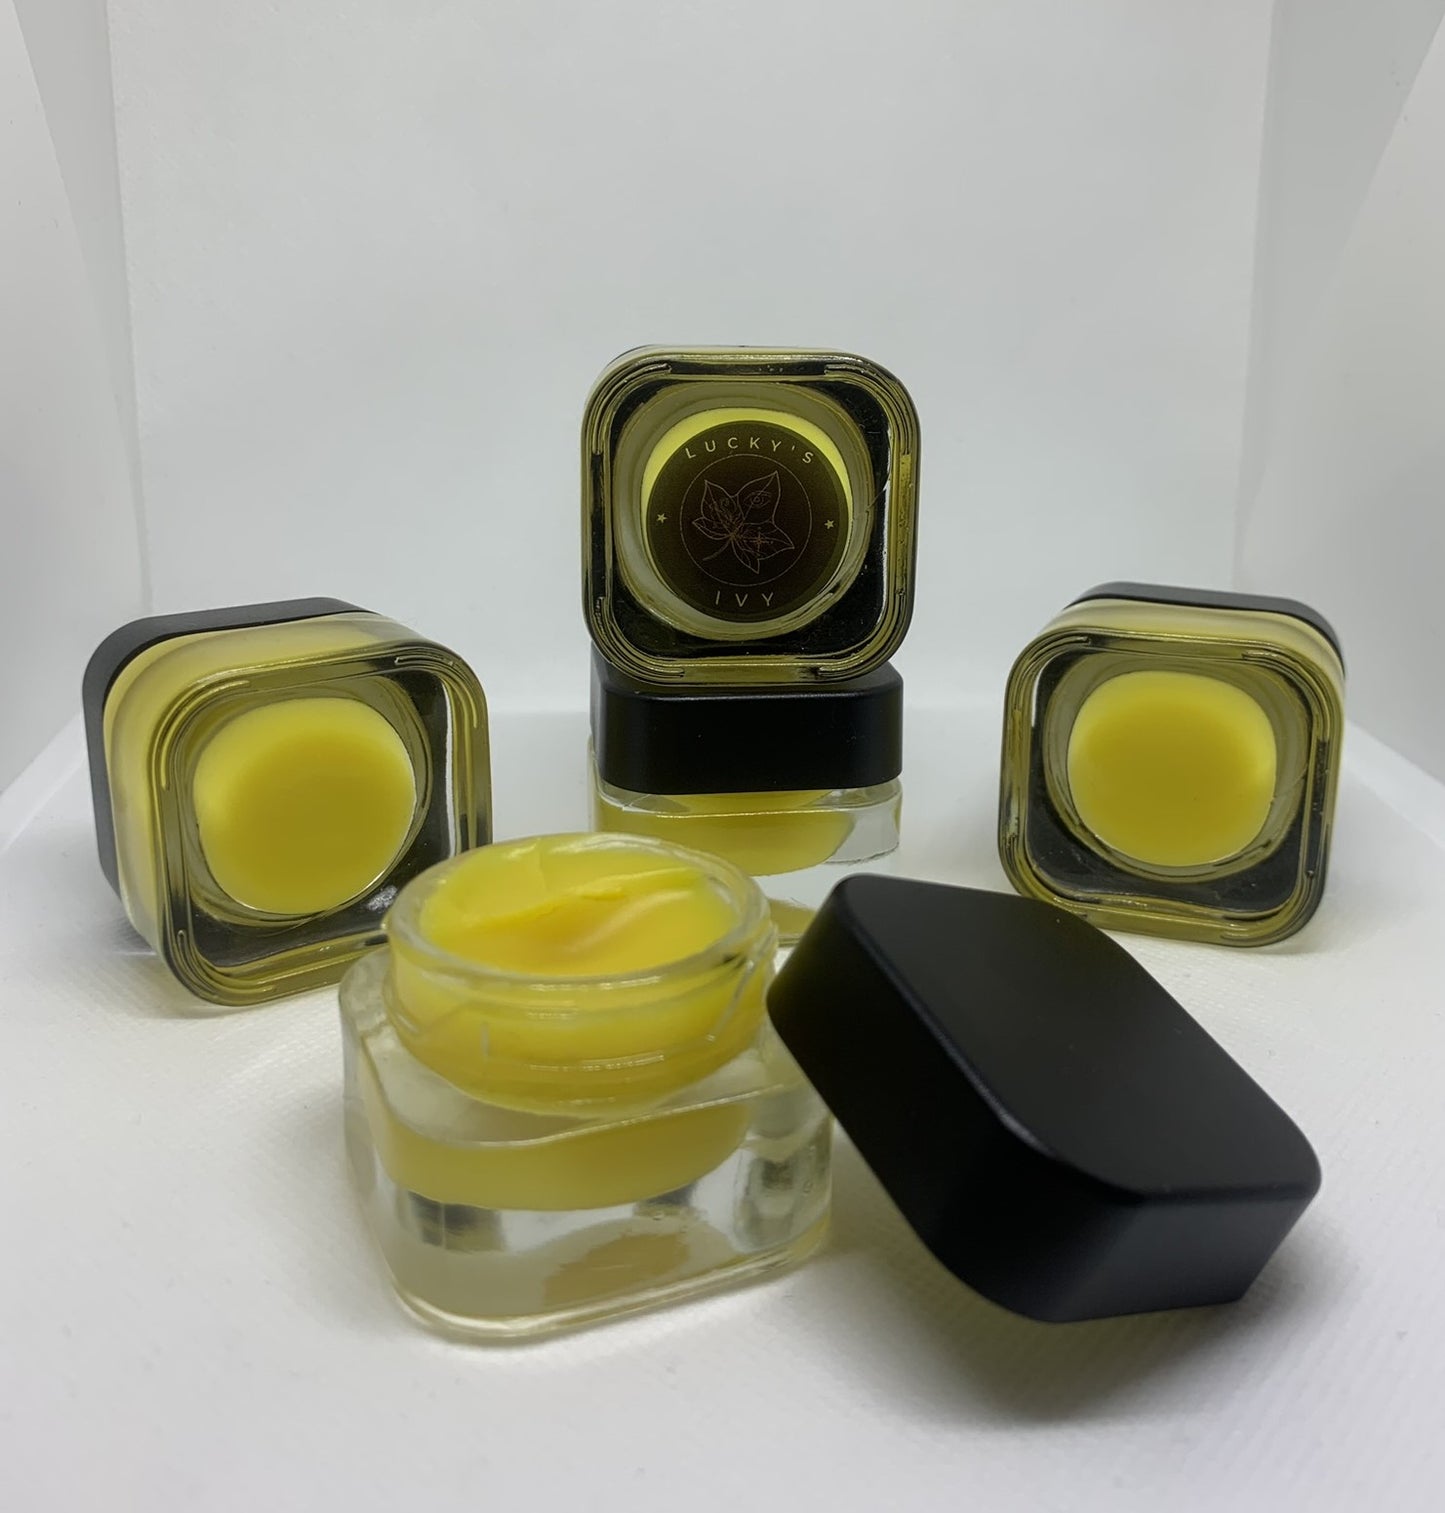 Image of Lucky's Ivy Golden Night Under-Eye Balm. One jar is open to show product texture, other jars are closed showing the outside of the product. 